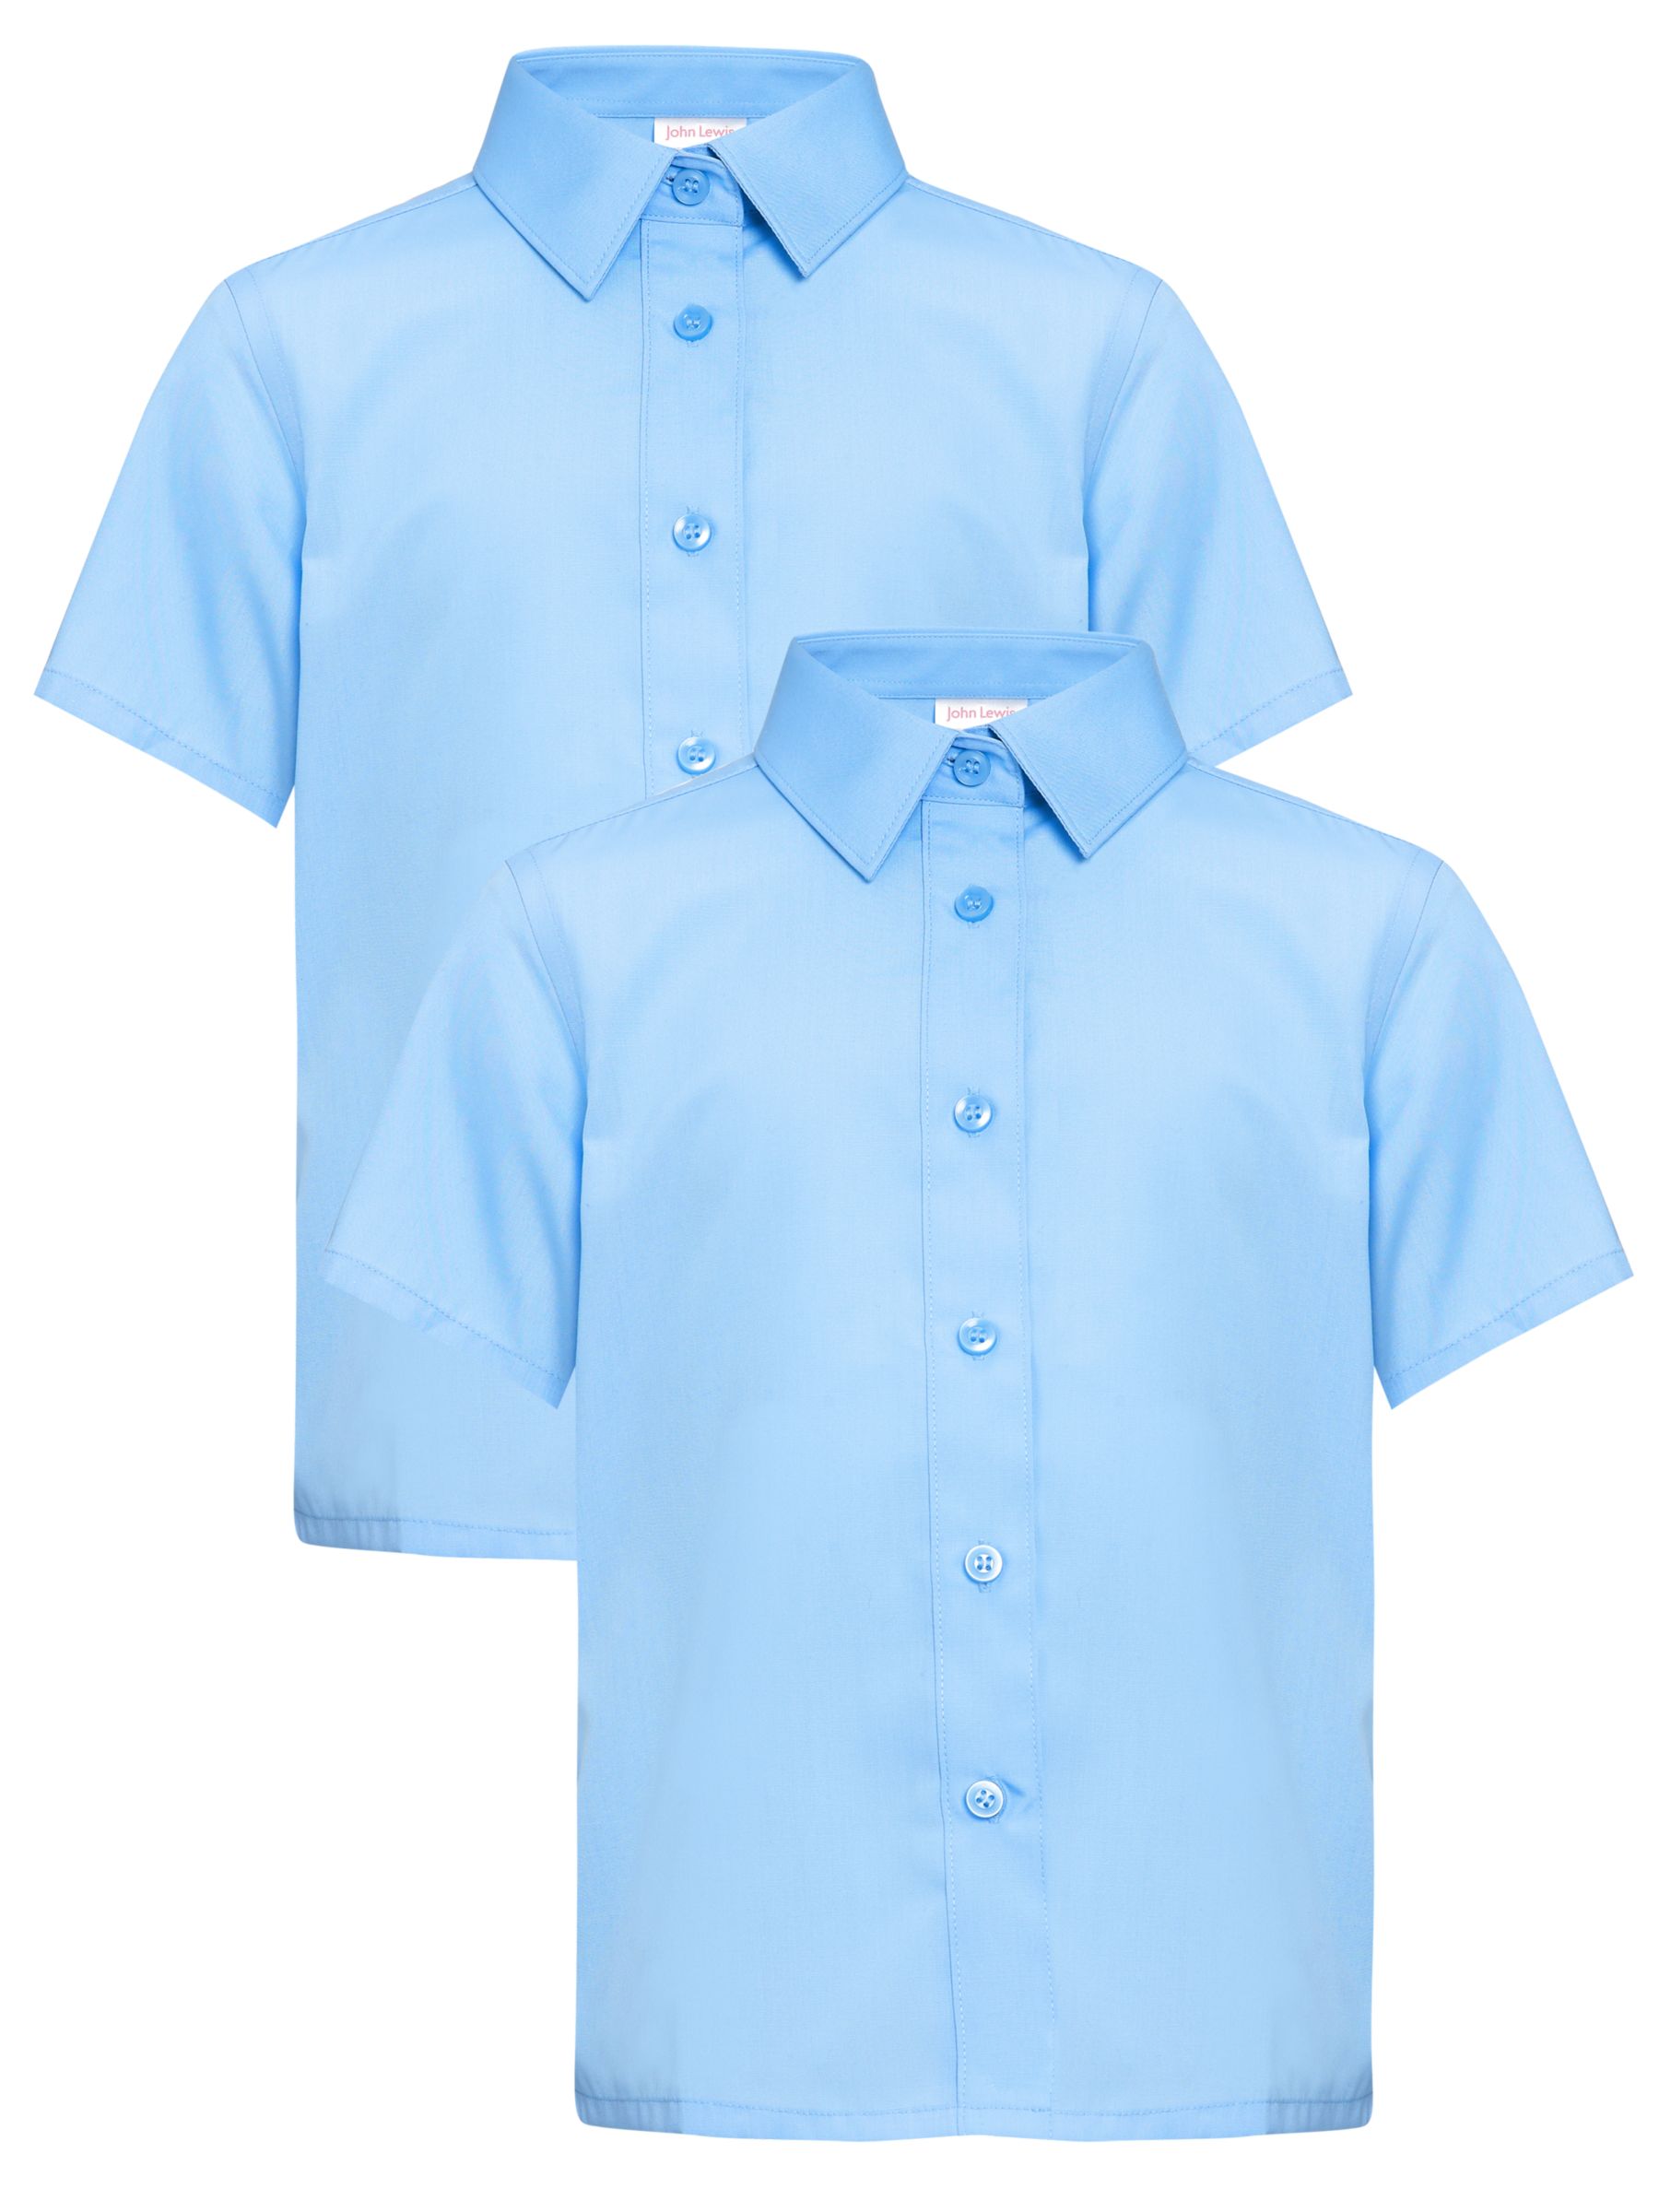 John Lewis Short Sleeved Button to Neck Blouses,